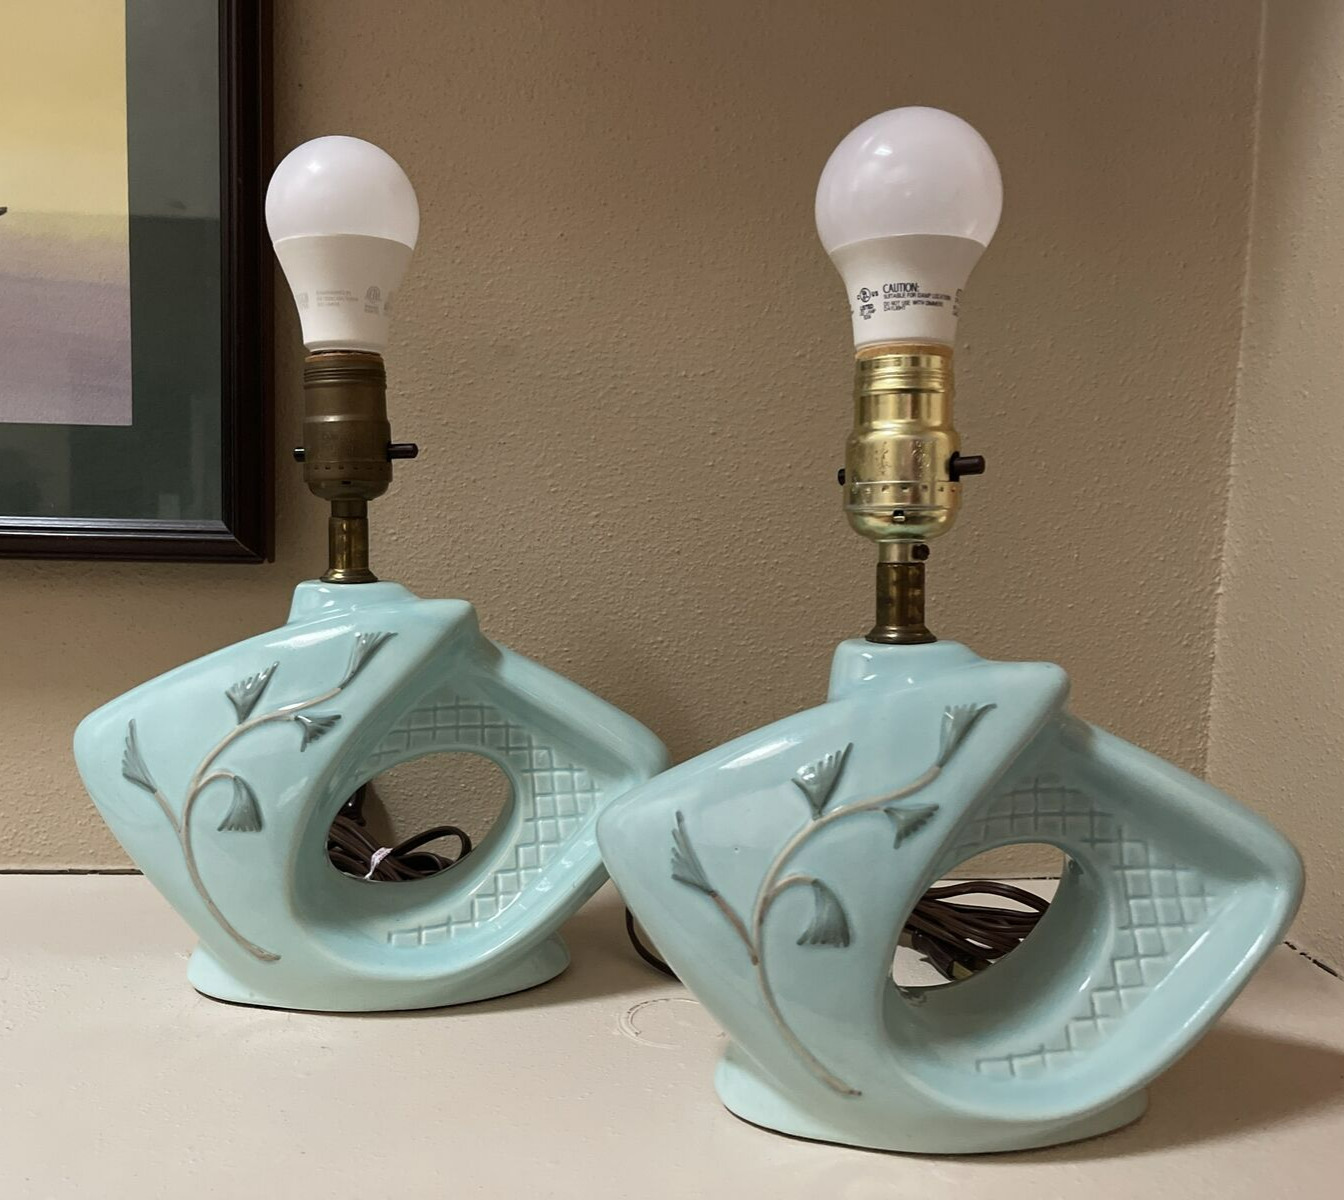 PAIR OF AWESOME MID CENTURY MODERN TEAL CERAMIC TABLE LAMPS VINTAGE WORKING